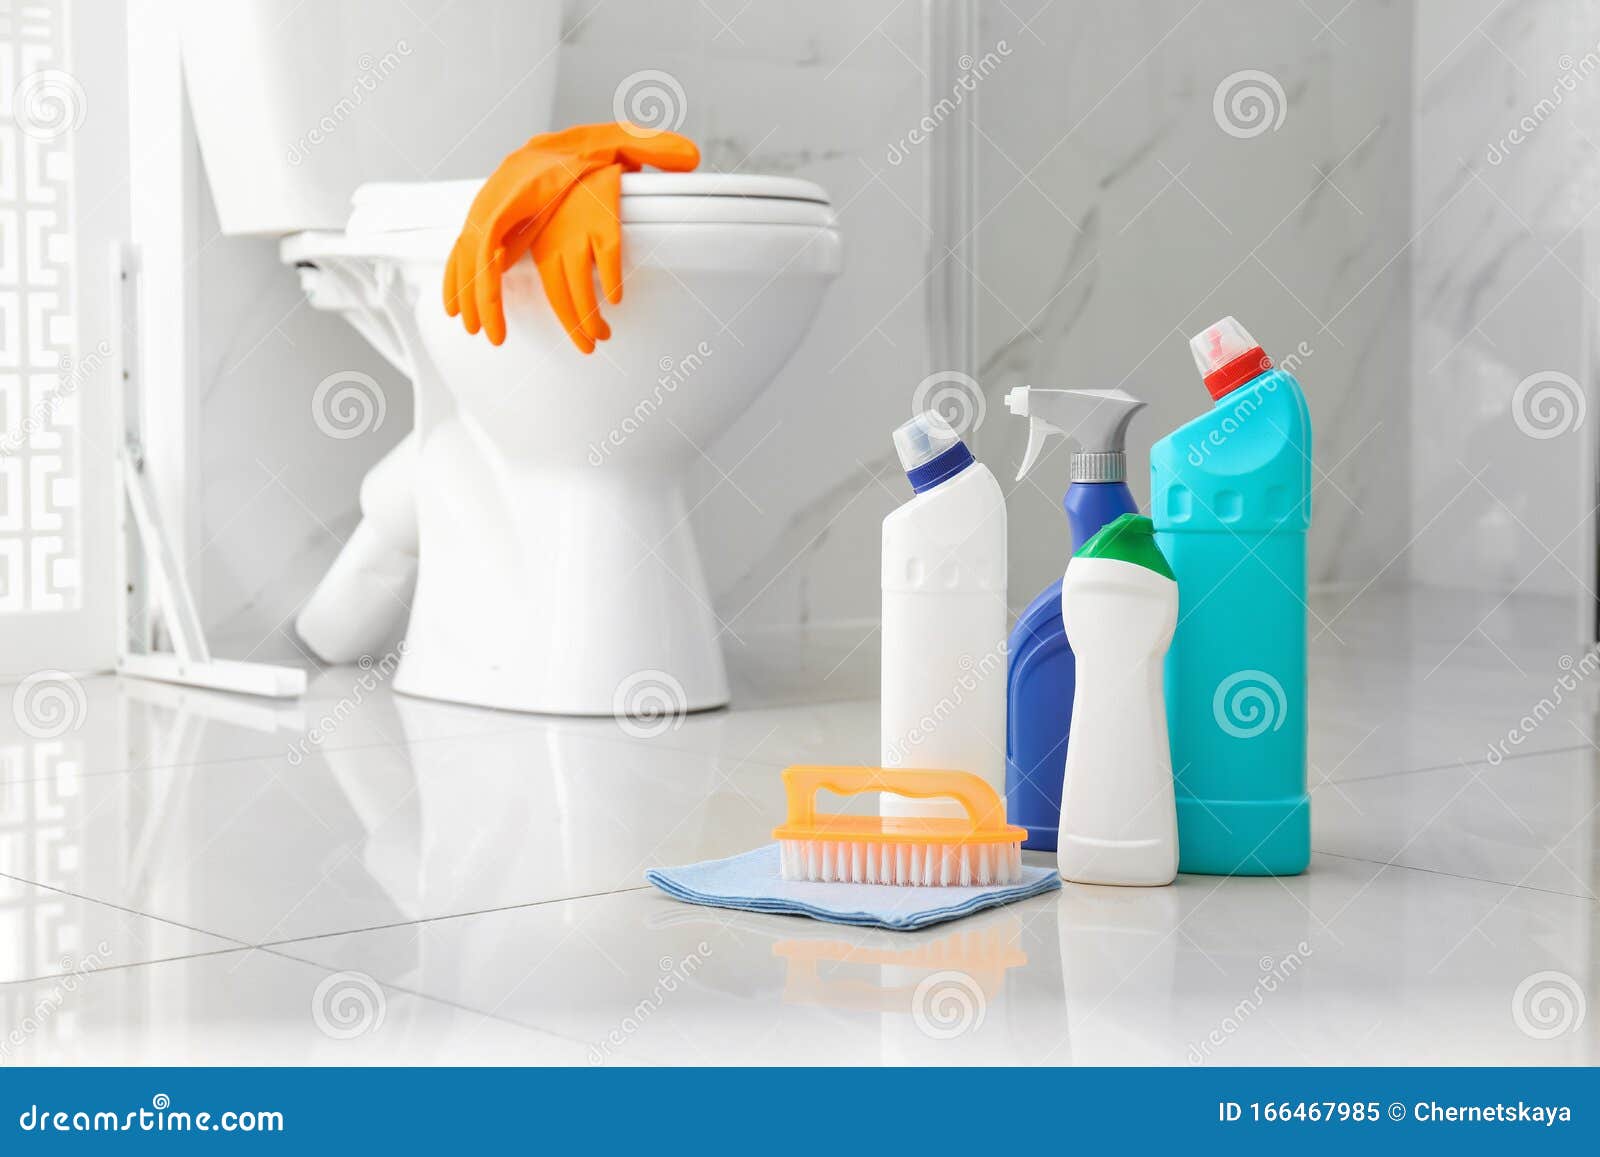 Different Toilet Cleaning Supplies On Wooden Stock Photo